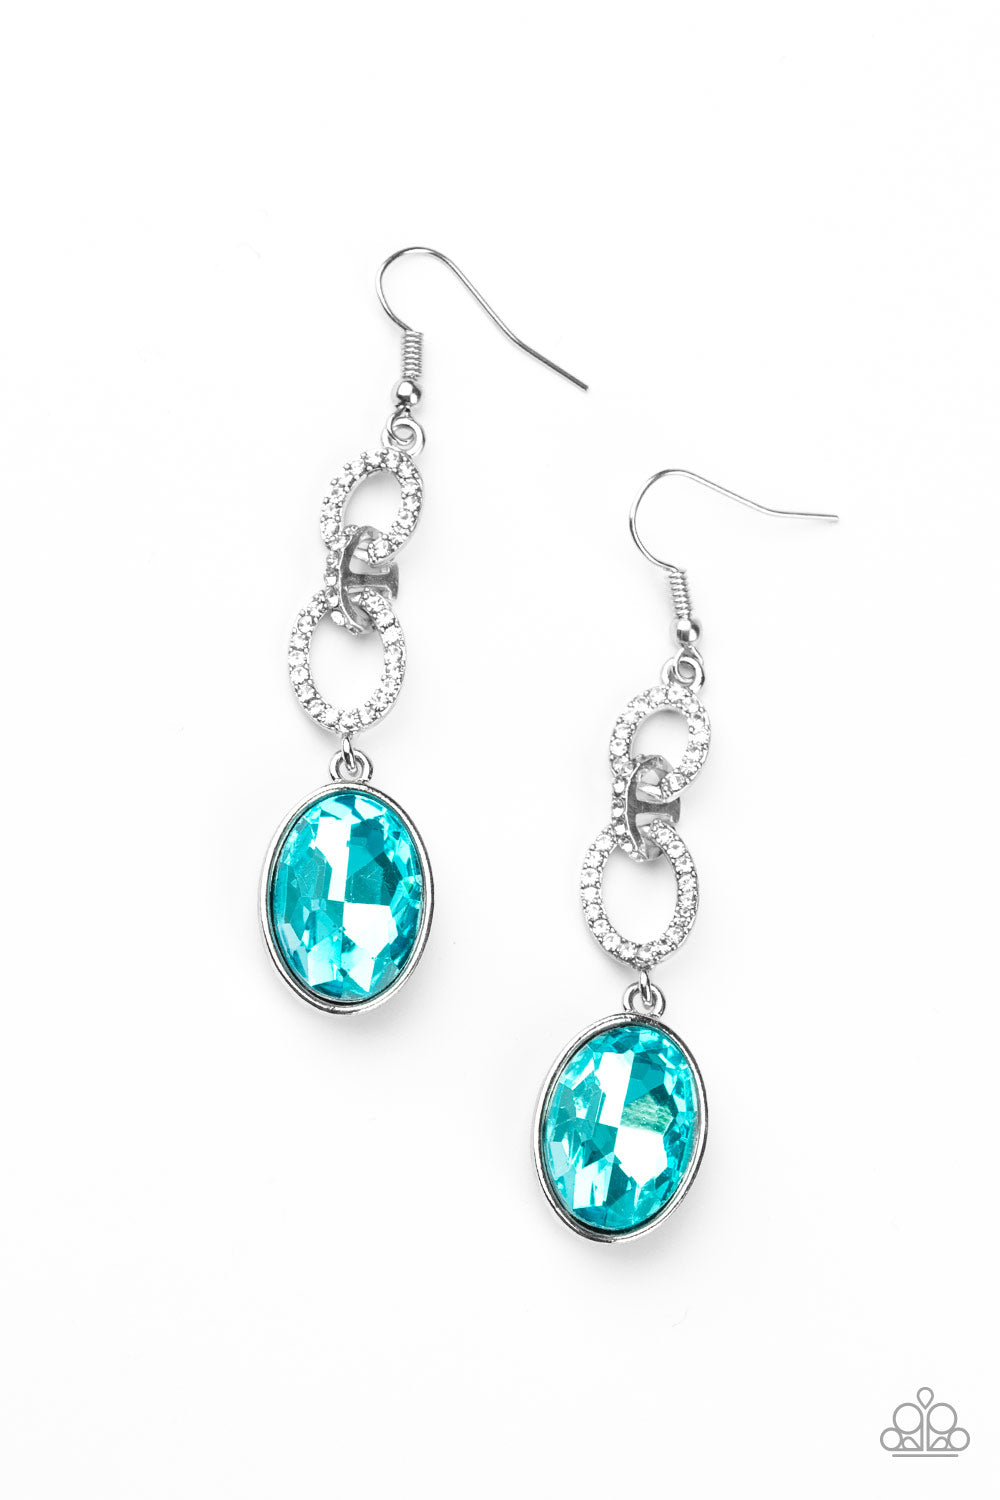 Paparazzi Extra Ice Queen - Blue Earrings - Fashion Plug Dramatic blue gem swings from the bottom of white rhinestone encrusted silver links, creating a glamorous lure. Earring attaches to a standard fish hook earring backs. Sold as one pair of dangle earrings. Free shipping on orders over $75